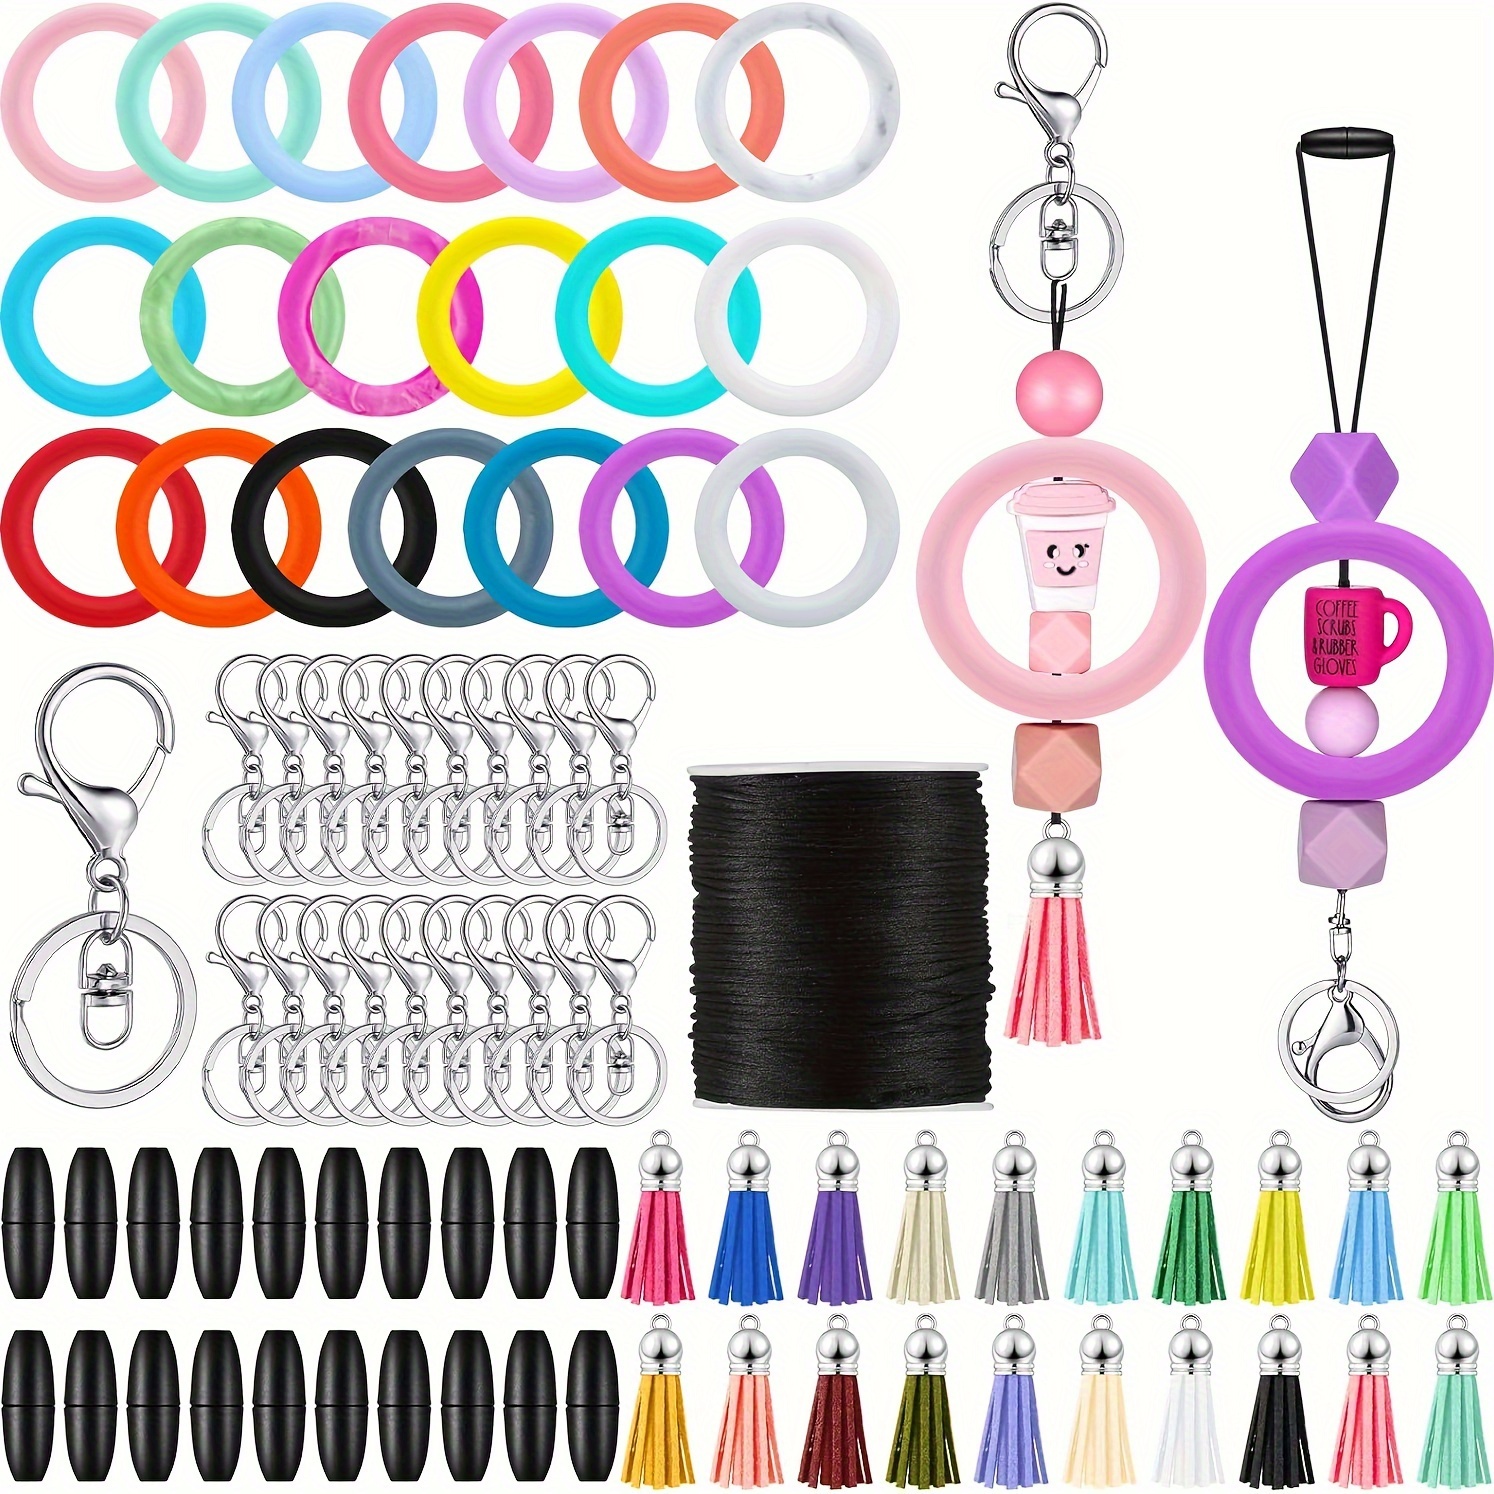 

81-piece Silicone Bead Keychain Making Kit - Diy Jewelry Craft Set With Colorful Beads, Rings & Pendants For Necklaces And Bracelets